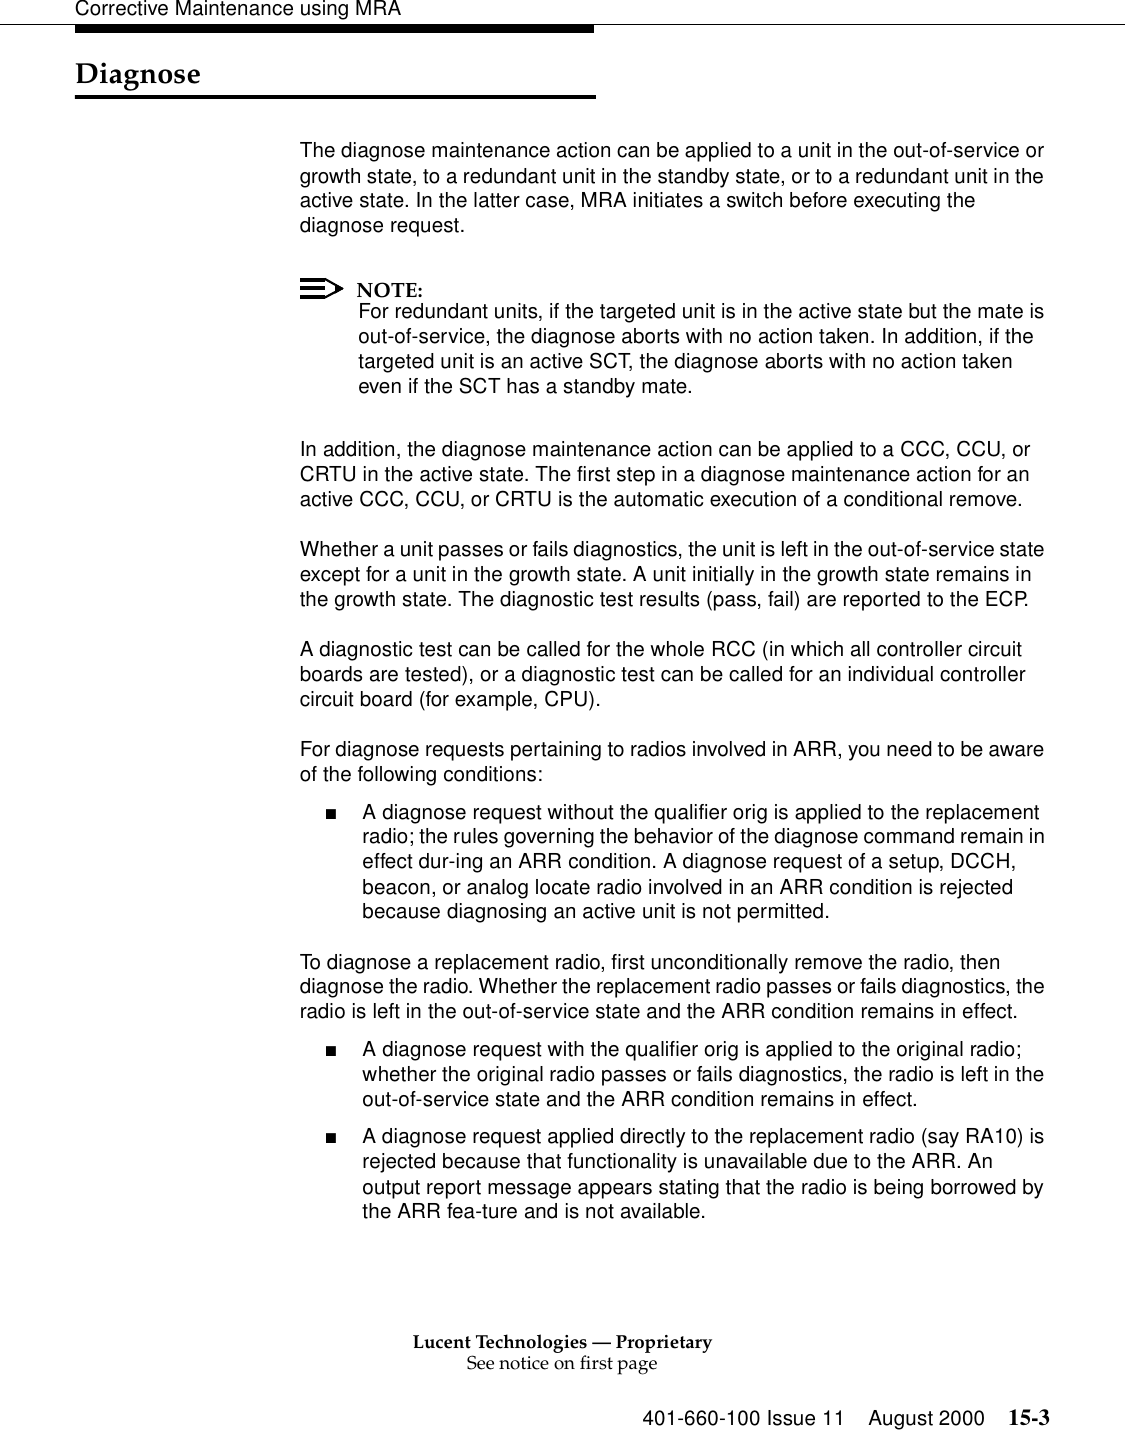 Lucent Technologies — ProprietarySee notice on first page401-660-100 Issue 11 August 2000 15-3Corrective Maintenance using MRADiagnoseThe diagnose maintenance action can be applied to a unit in the out-of-service or growth state, to a redundant unit in the standby state, or to a redundant unit in the active state. In the latter case, MRA initiates a switch before executing the diagnose request. NOTE:For redundant units, if the targeted unit is in the active state but the mate is out-of-service, the diagnose aborts with no action taken. In addition, if the targeted unit is an active SCT, the diagnose aborts with no action taken even if the SCT has a standby mate. In addition, the diagnose maintenance action can be applied to a CCC, CCU, or CRTU in the active state. The first step in a diagnose maintenance action for an active CCC, CCU, or CRTU is the automatic execution of a conditional remove. Whether a unit passes or fails diagnostics, the unit is left in the out-of-service state except for a unit in the growth state. A unit initially in the growth state remains in the growth state. The diagnostic test results (pass, fail) are reported to the ECP. A diagnostic test can be called for the whole RCC (in which all controller circuit boards are tested), or a diagnostic test can be called for an individual controller circuit board (for example, CPU). For diagnose requests pertaining to radios involved in ARR, you need to be aware of the following conditions: ■A diagnose request without the qualifier orig is applied to the replacement radio; the rules governing the behavior of the diagnose command remain in effect dur-ing an ARR condition. A diagnose request of a setup, DCCH, beacon, or analog locate radio involved in an ARR condition is rejected because diagnosing an active unit is not permitted. To diagnose a replacement radio, first unconditionally remove the radio, then diagnose the radio. Whether the replacement radio passes or fails diagnostics, the radio is left in the out-of-service state and the ARR condition remains in effect. ■A diagnose request with the qualifier orig is applied to the original radio; whether the original radio passes or fails diagnostics, the radio is left in the out-of-service state and the ARR condition remains in effect. ■A diagnose request applied directly to the replacement radio (say RA10) is rejected because that functionality is unavailable due to the ARR. An output report message appears stating that the radio is being borrowed by the ARR fea-ture and is not available. 